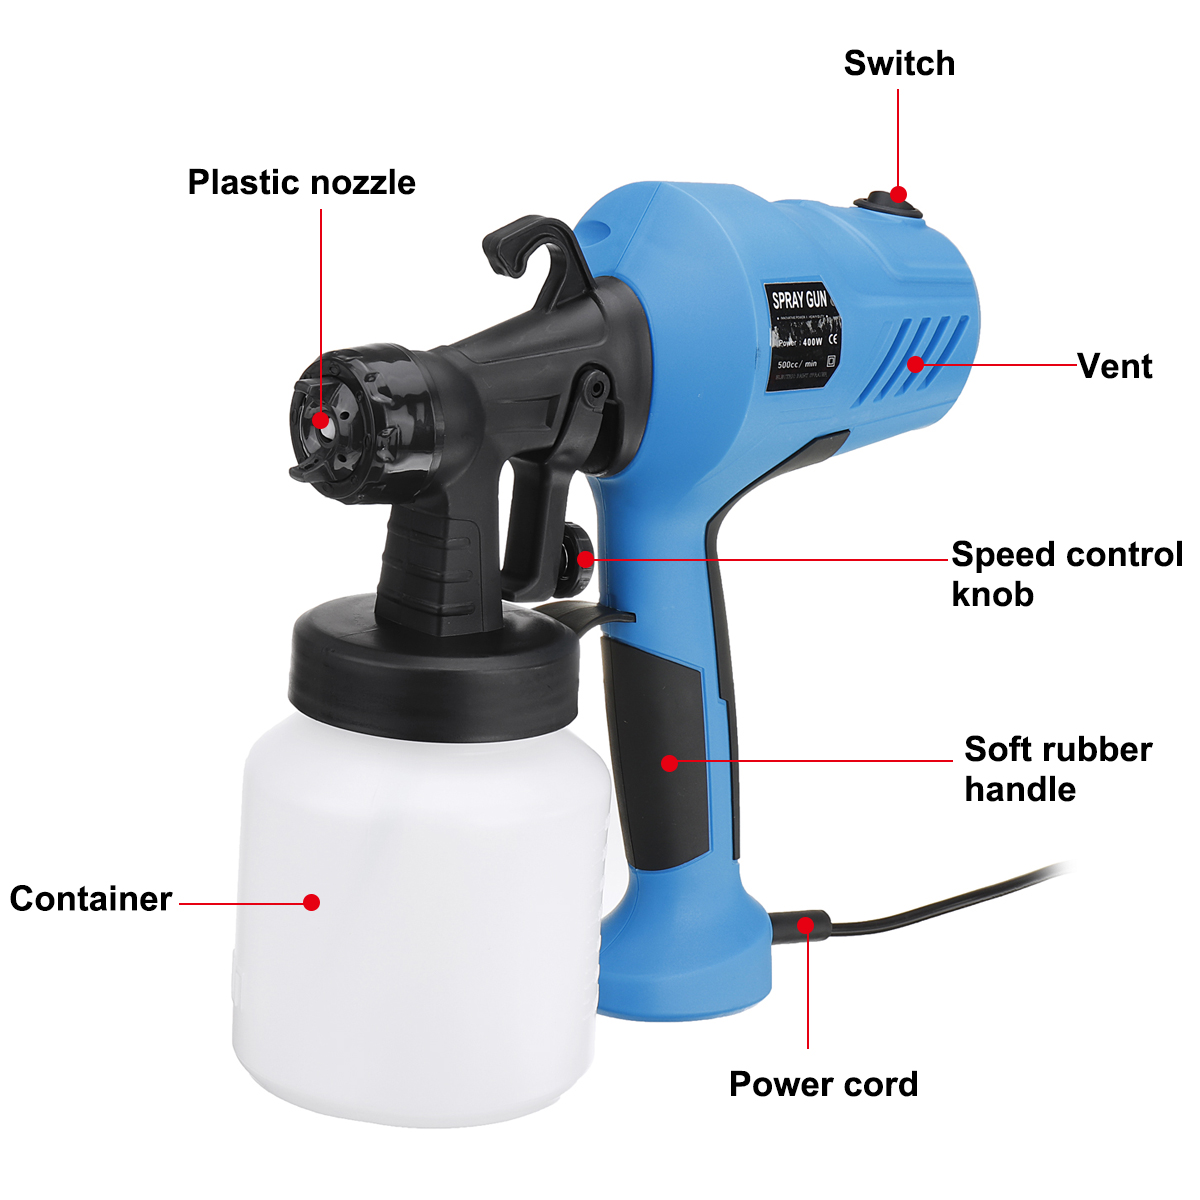 800ml-220V-400W-High-Power-Electric-Machine-Paint-Sprayer-Painting-Fogger-Sprayer-Tool-For-Indoor-An-1716537-5